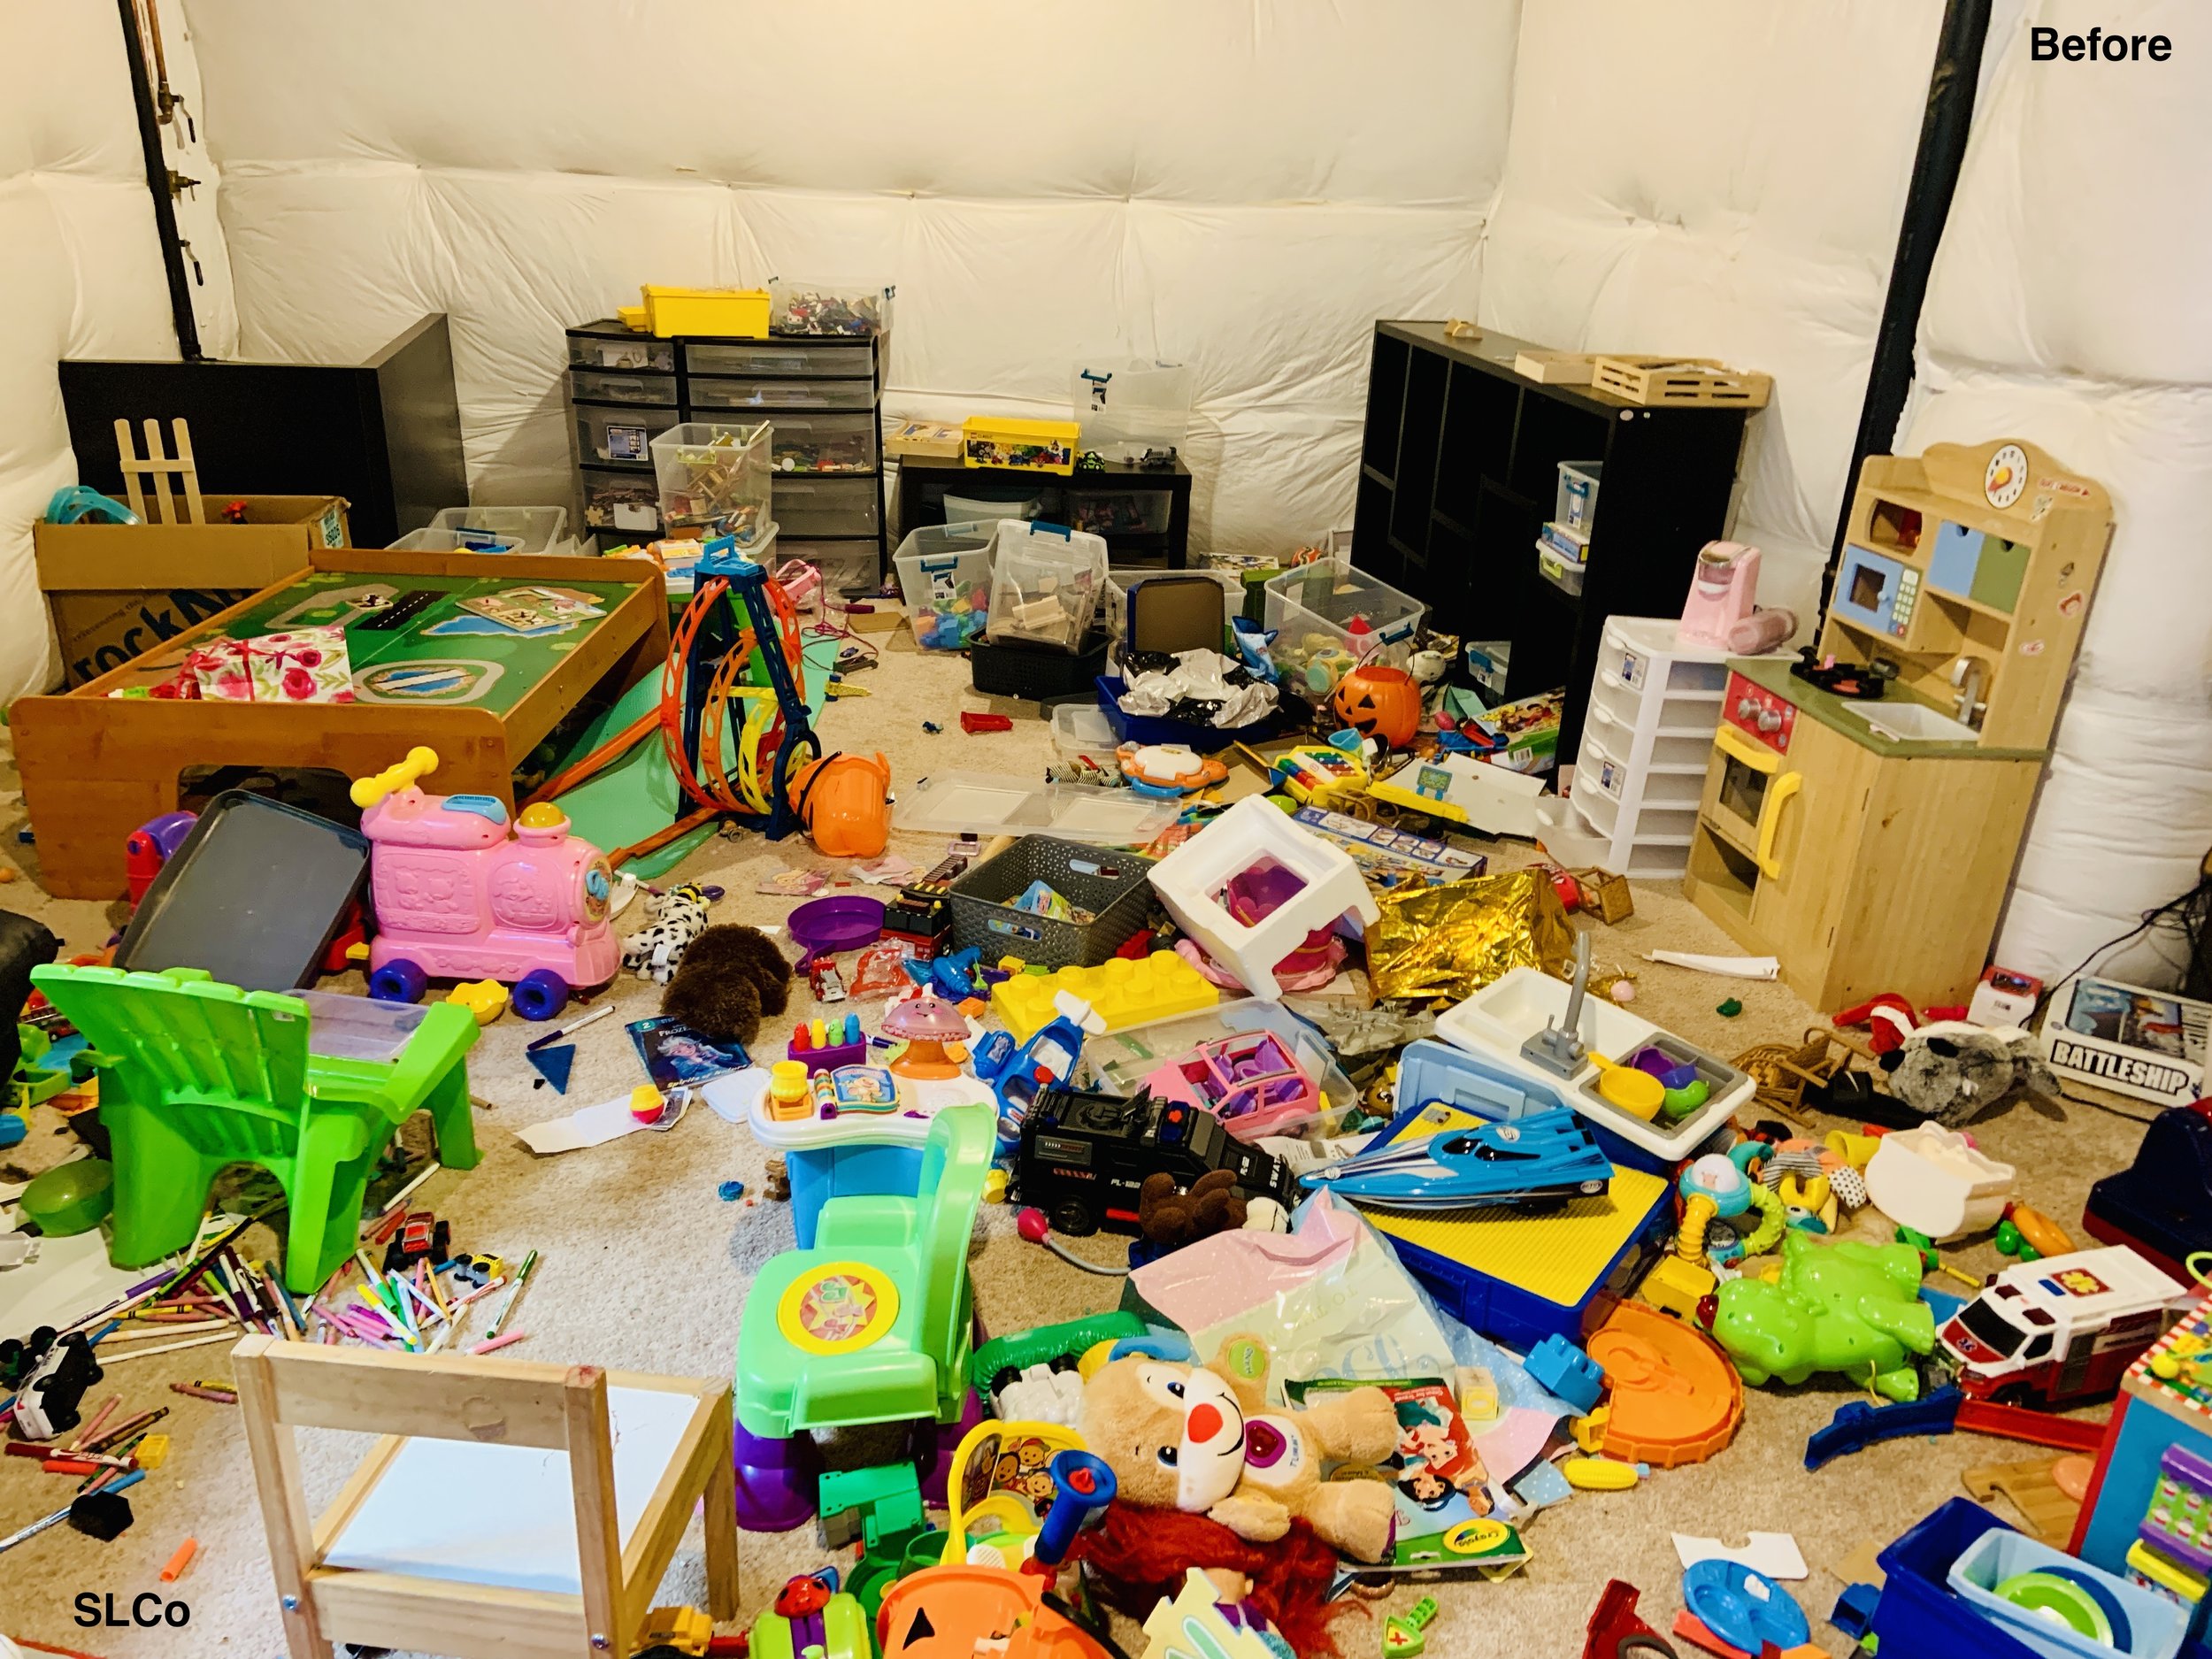 Playroom with children's toys all over the floor, unwalkable.